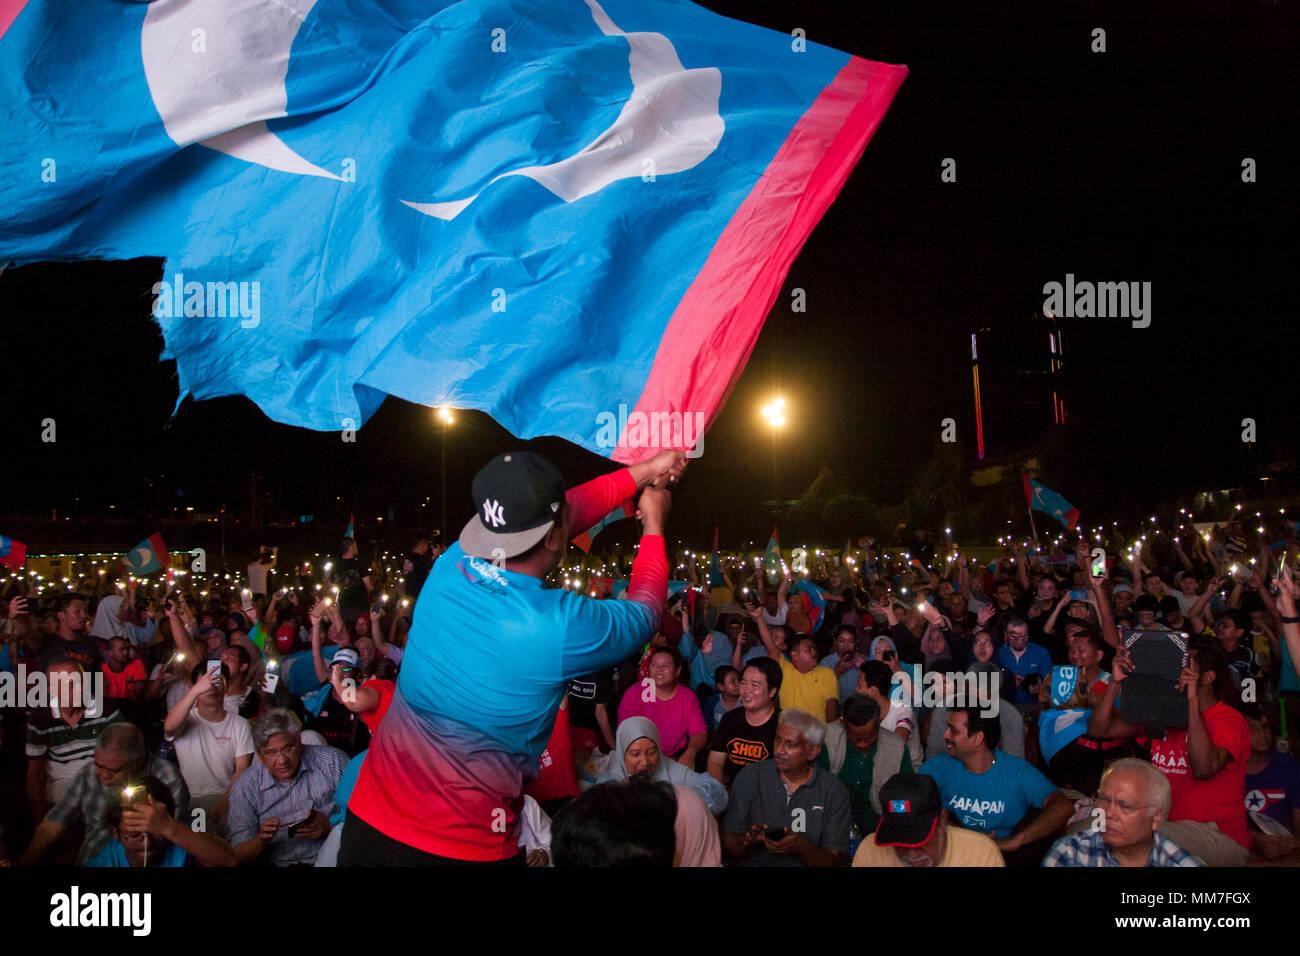 Thousand Of People Seen Cheering At Padang Timur Mbpj While An Man Waving The Political Party Flag To Celebrate Pakatan Harapan Win The 14th Malaysia General Election Pakatan Harapan Malaysia Opposition Political